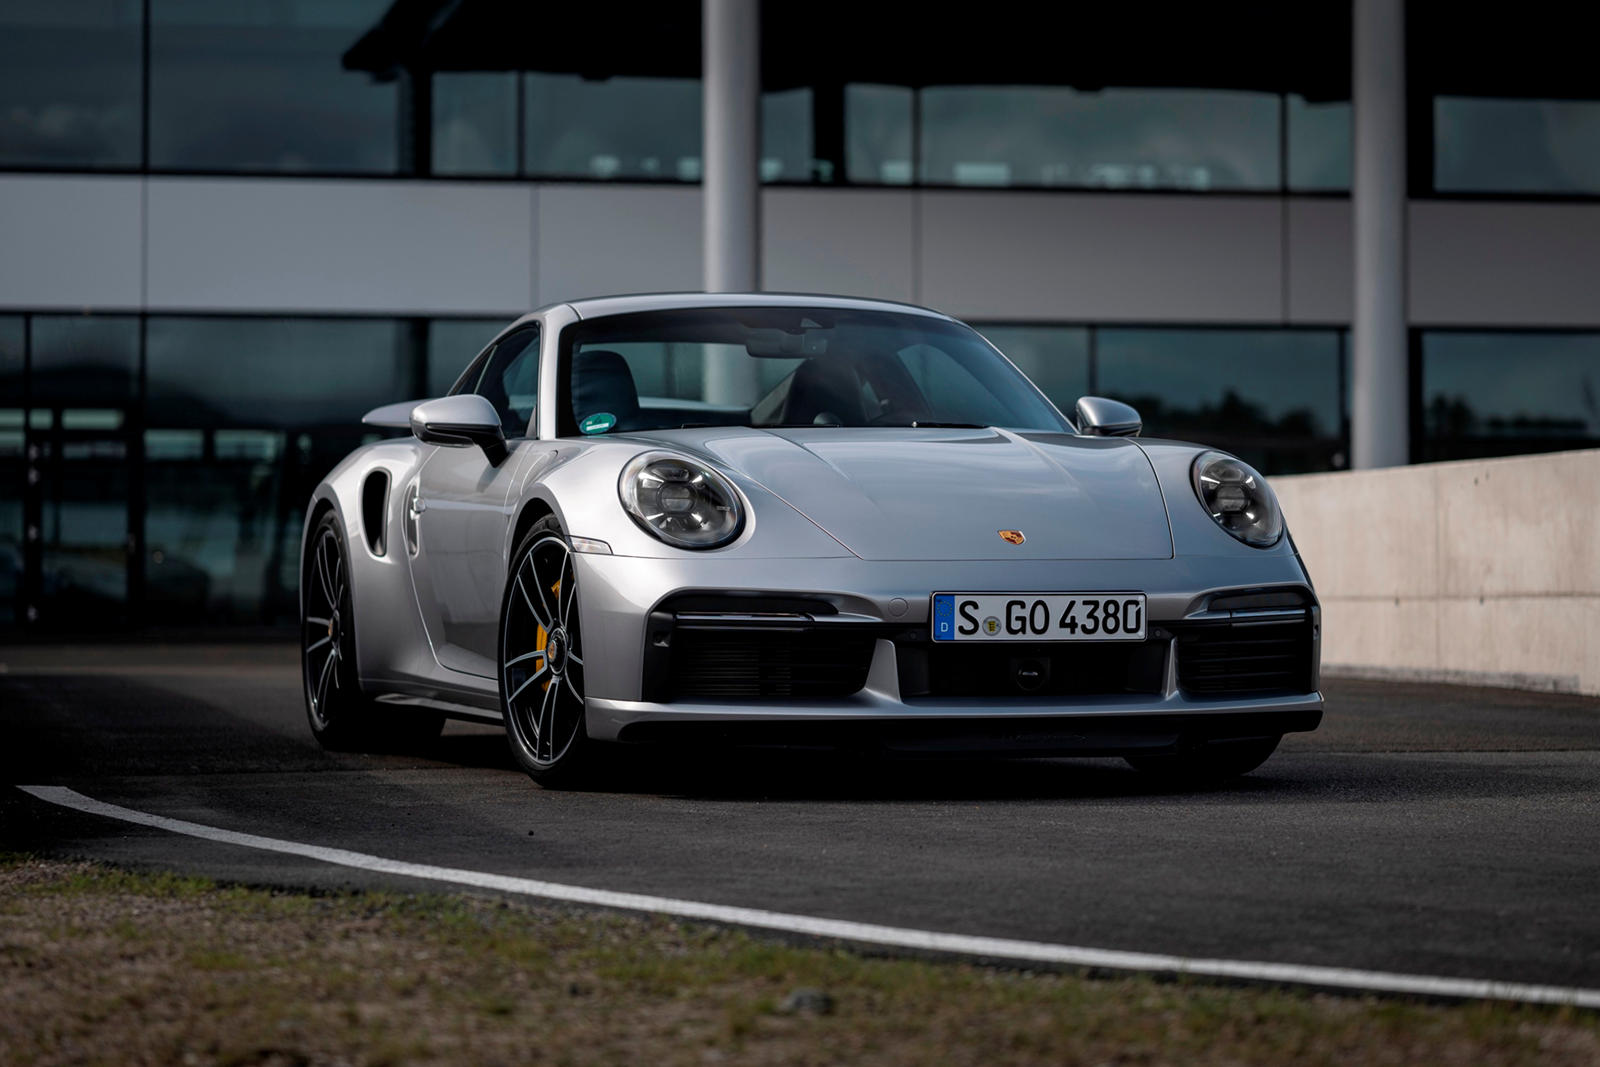 Man Drives Porsche 12 Hours to Distillery, Tries to Break In, Gets Arrested